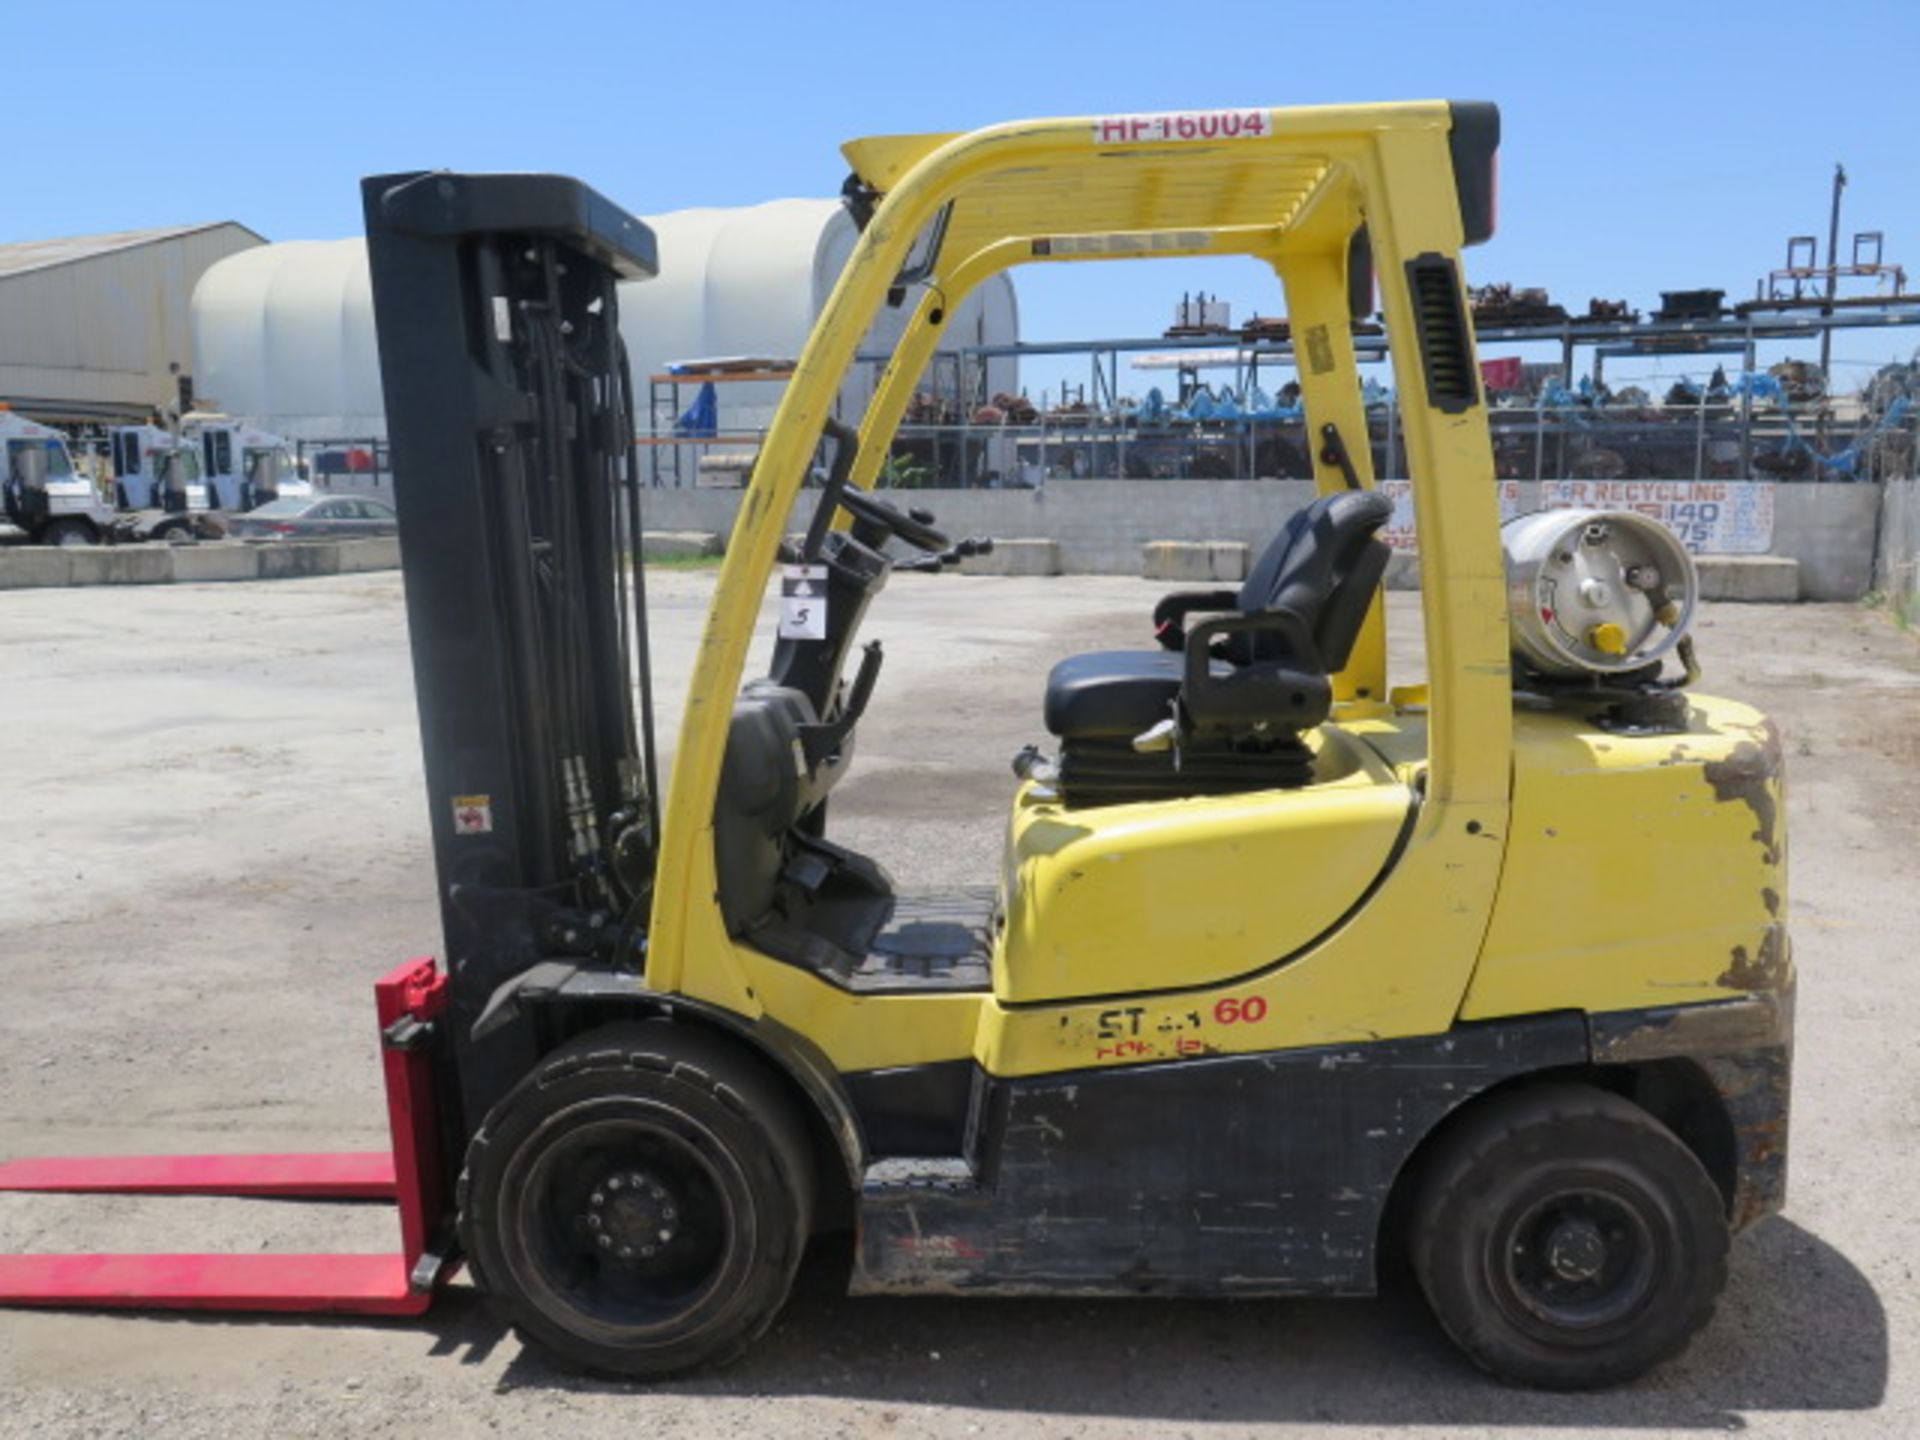 2018 Hyster H60FT 6000 Lb Cap LPG Forklift s/n P177V04957P w/ 3-Stage,182” Lift Height, SOLD AS IS